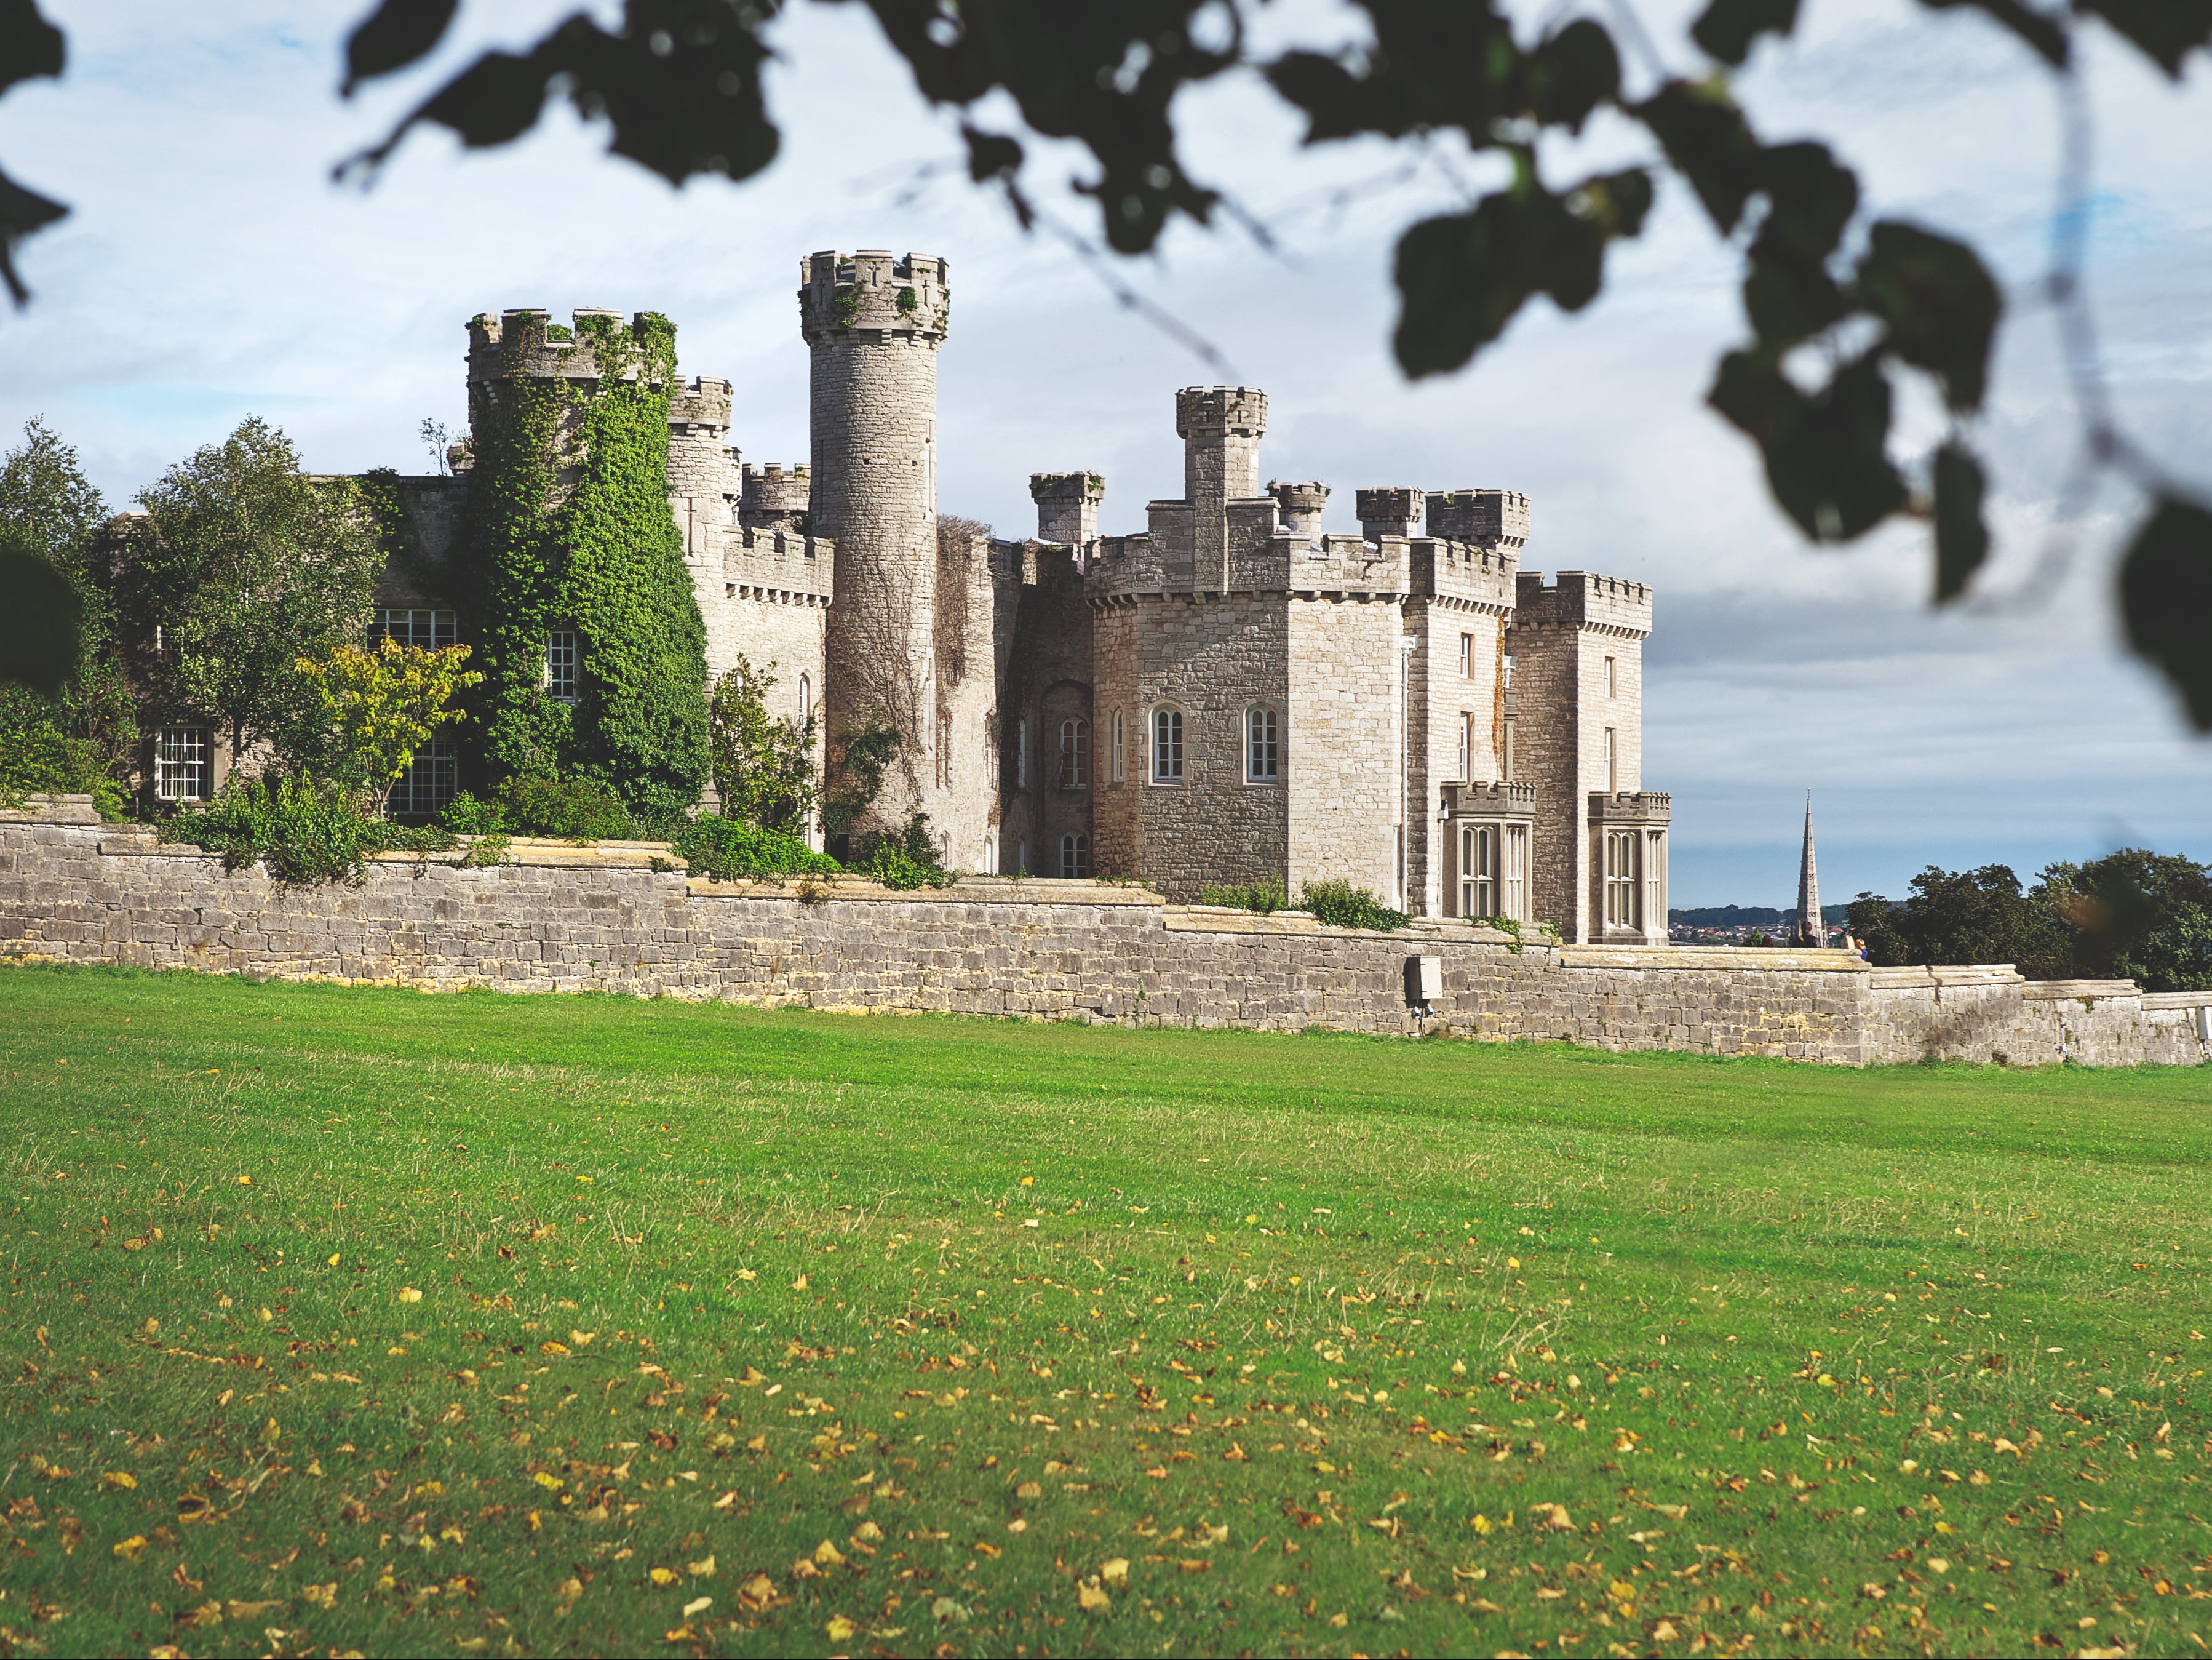 Bodelwyddan Castle has a mix of Gothic, Jacobean and Greek Revival architecture